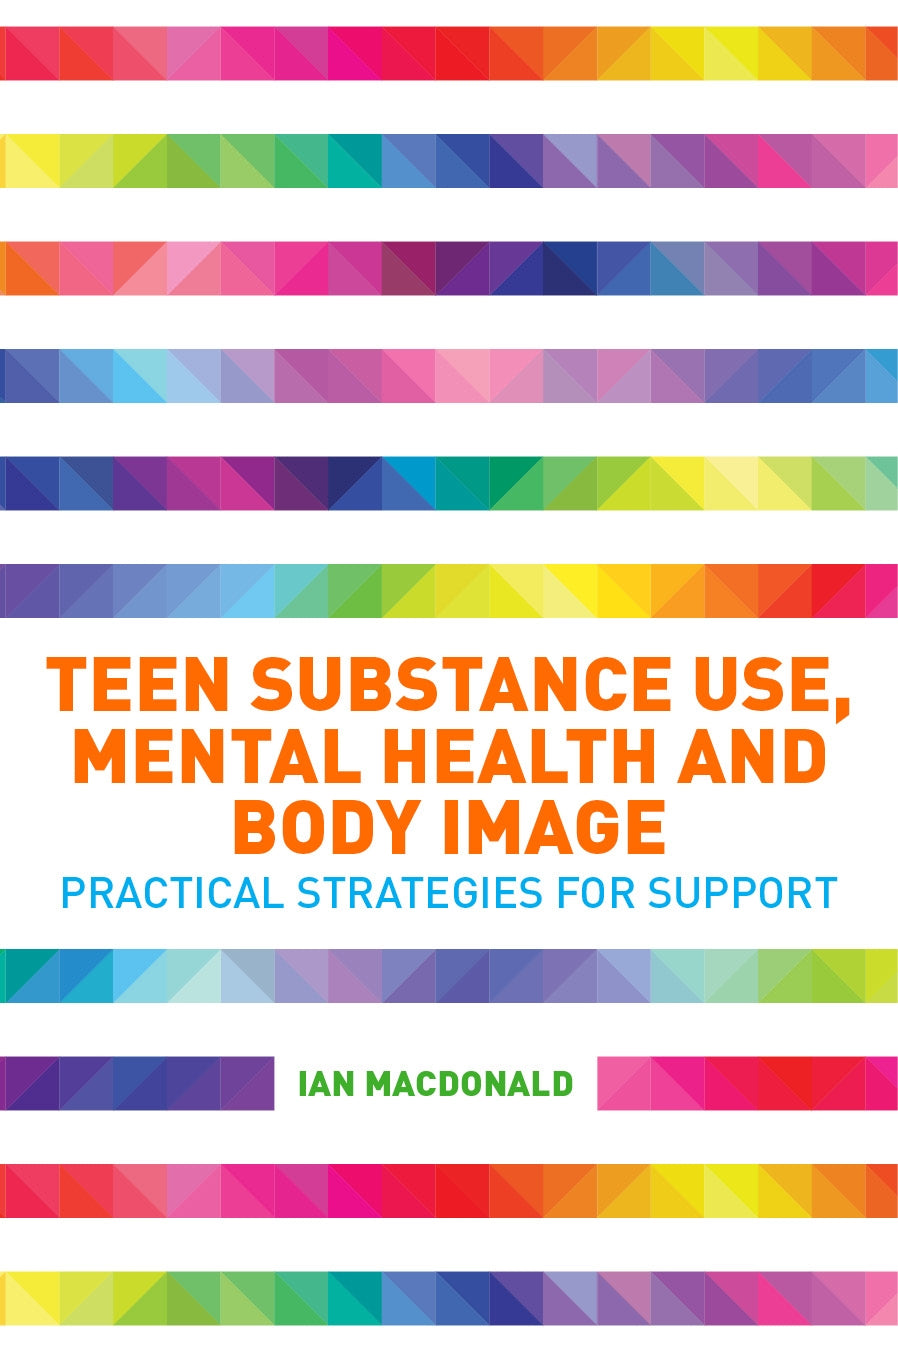 Teen Substance Use, Mental Health and Body Image by Ian Macdonald